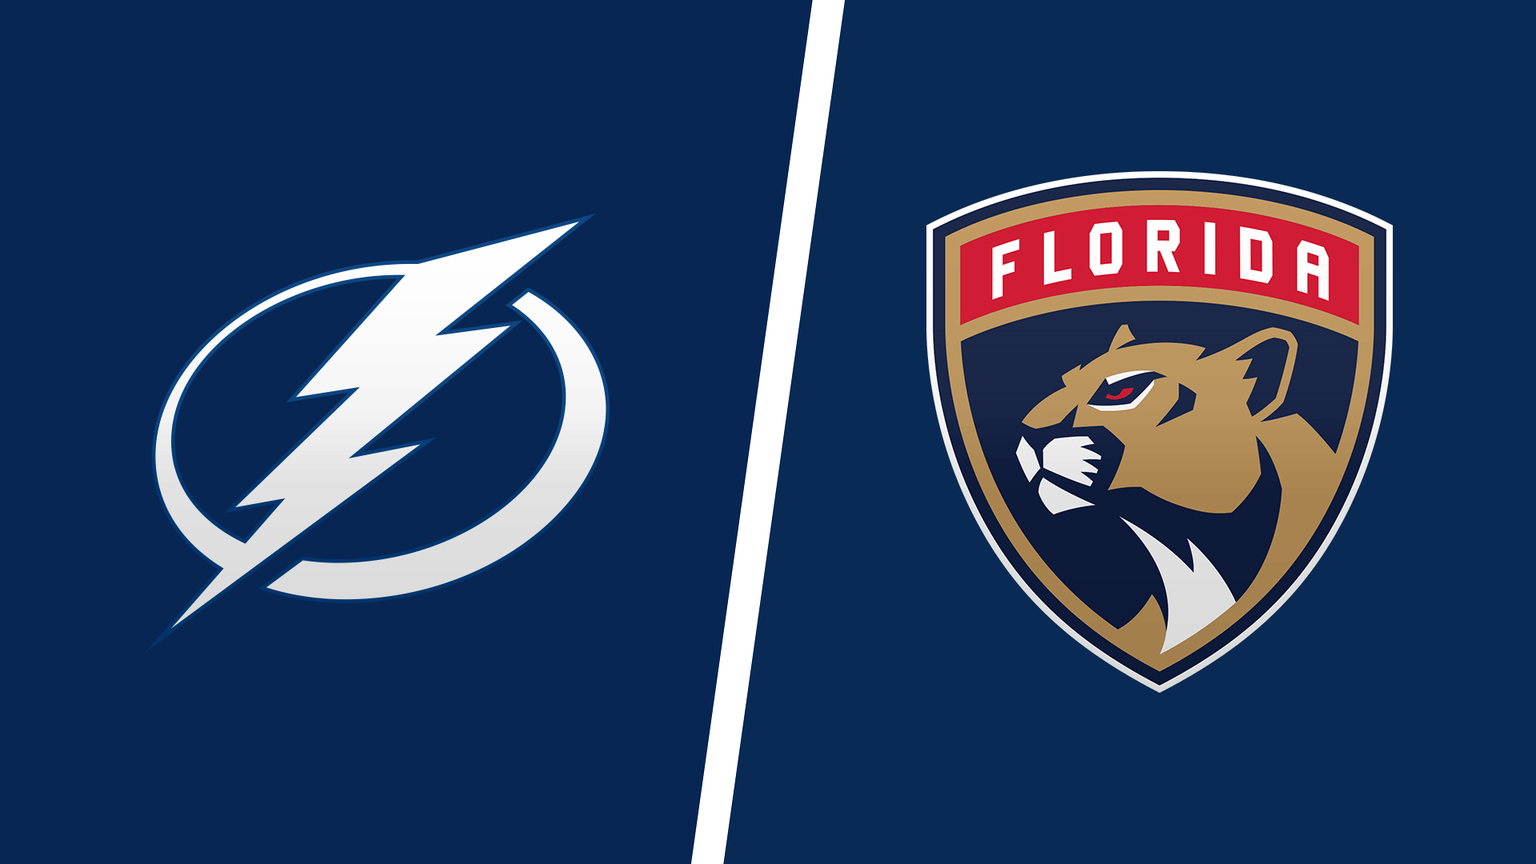 How to Watch Florida Panthers vs. Tampa Bay Lightning Game Live Online